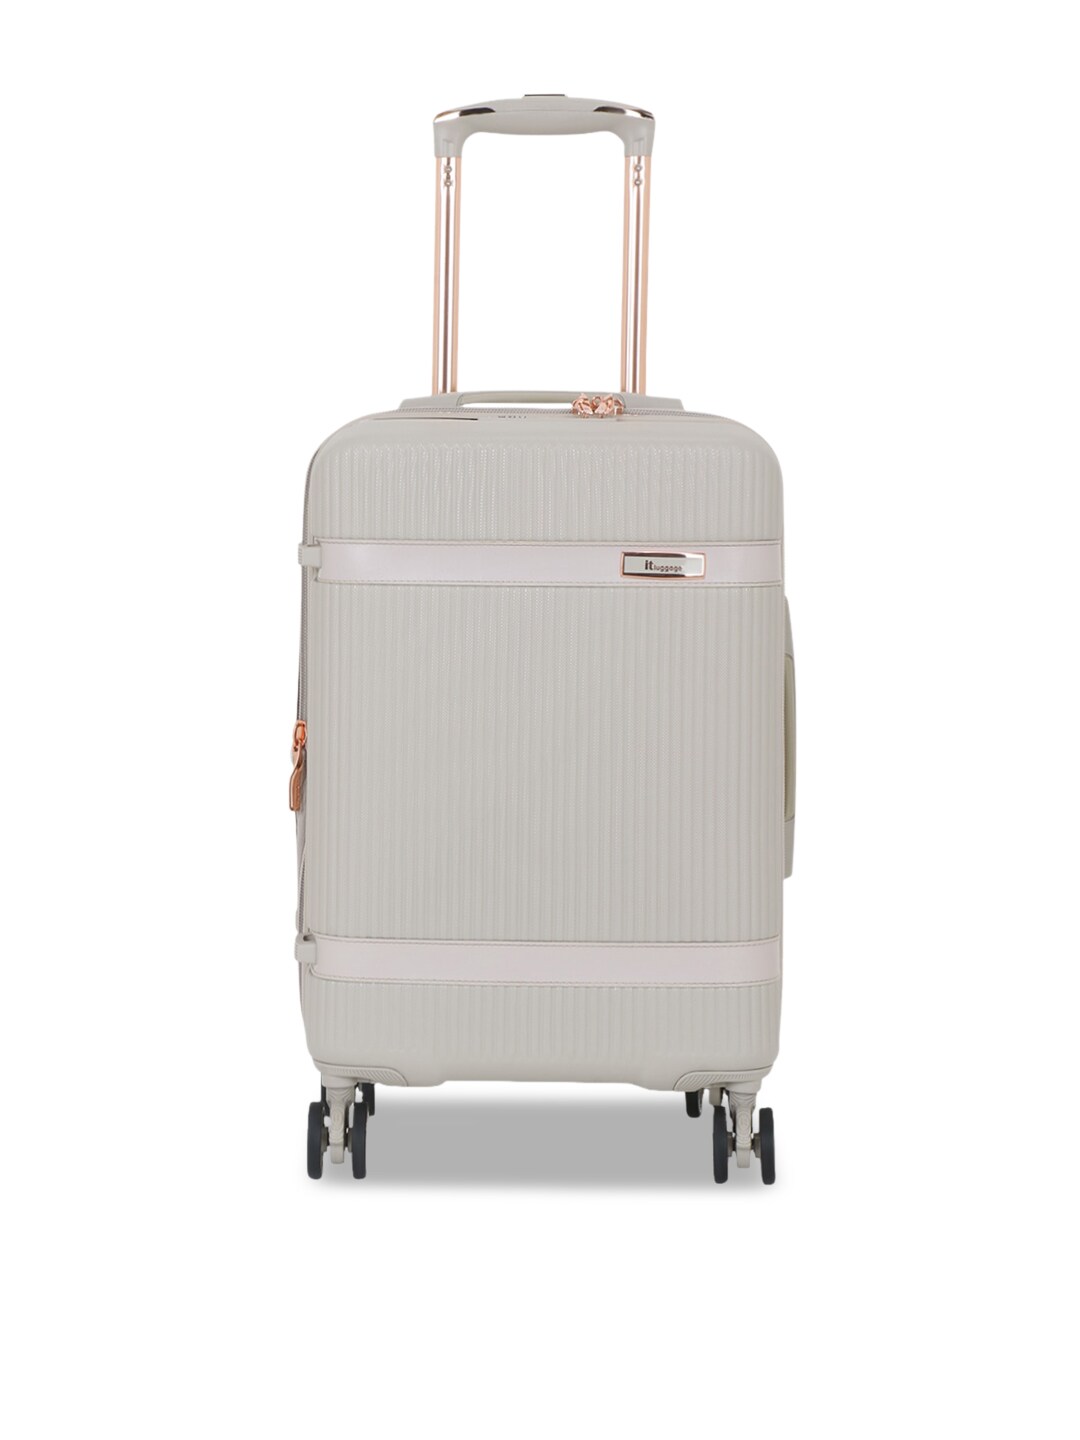 IT luggage Grey Textured Hard-Sided Trolley Suitcase Price in India